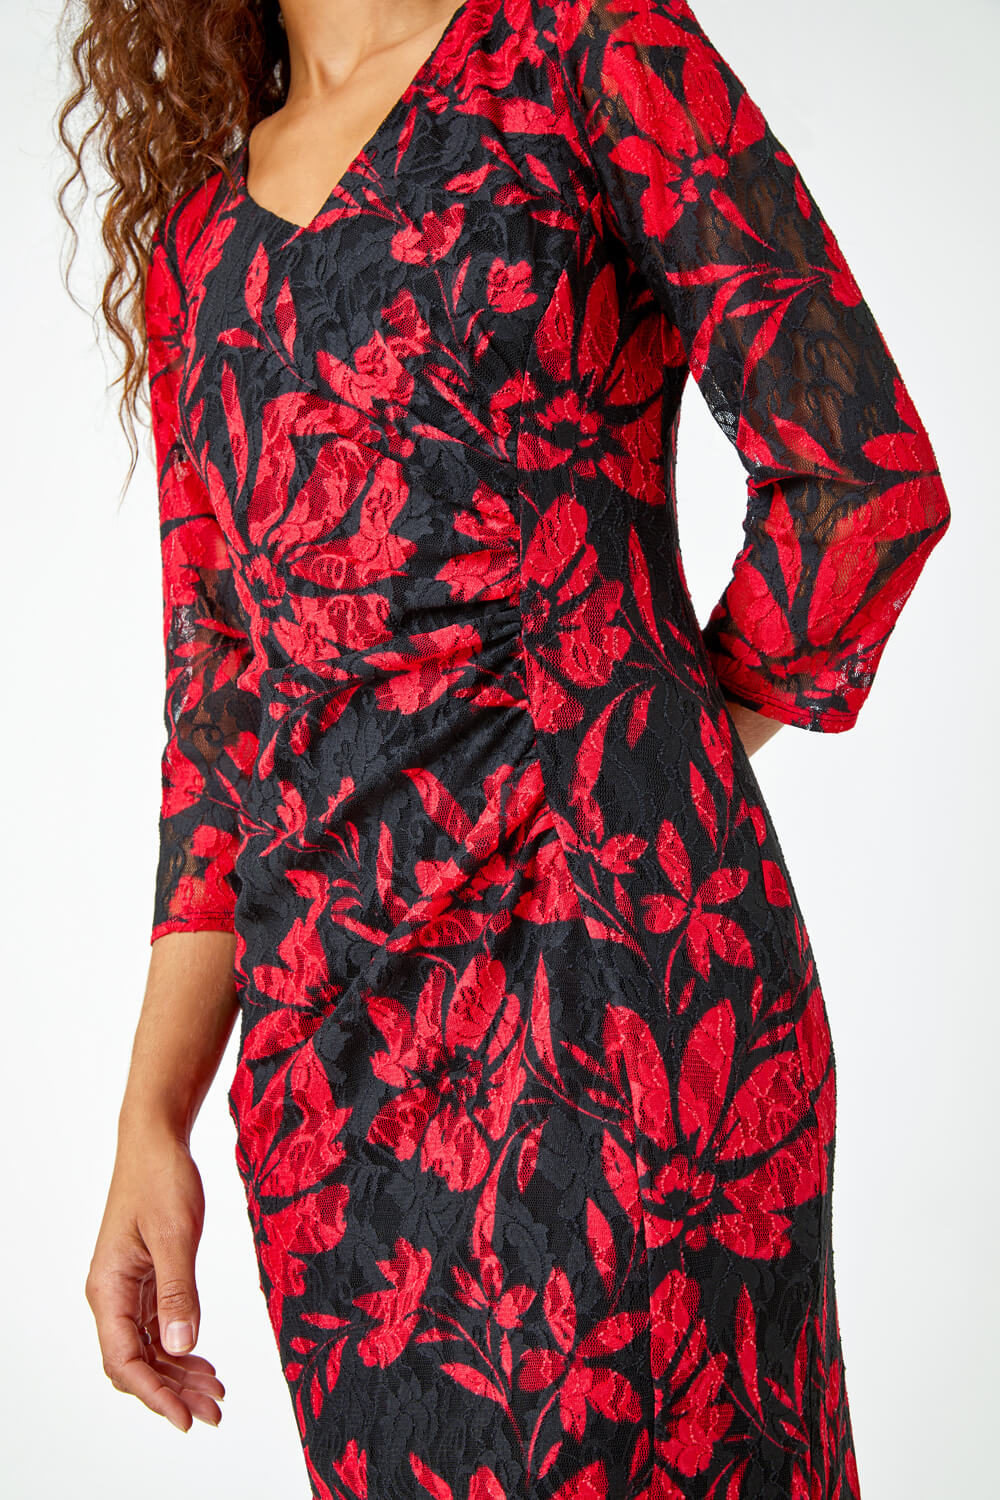 Red Floral Print Lace Shift Stretch Dress , Image 5 of 5